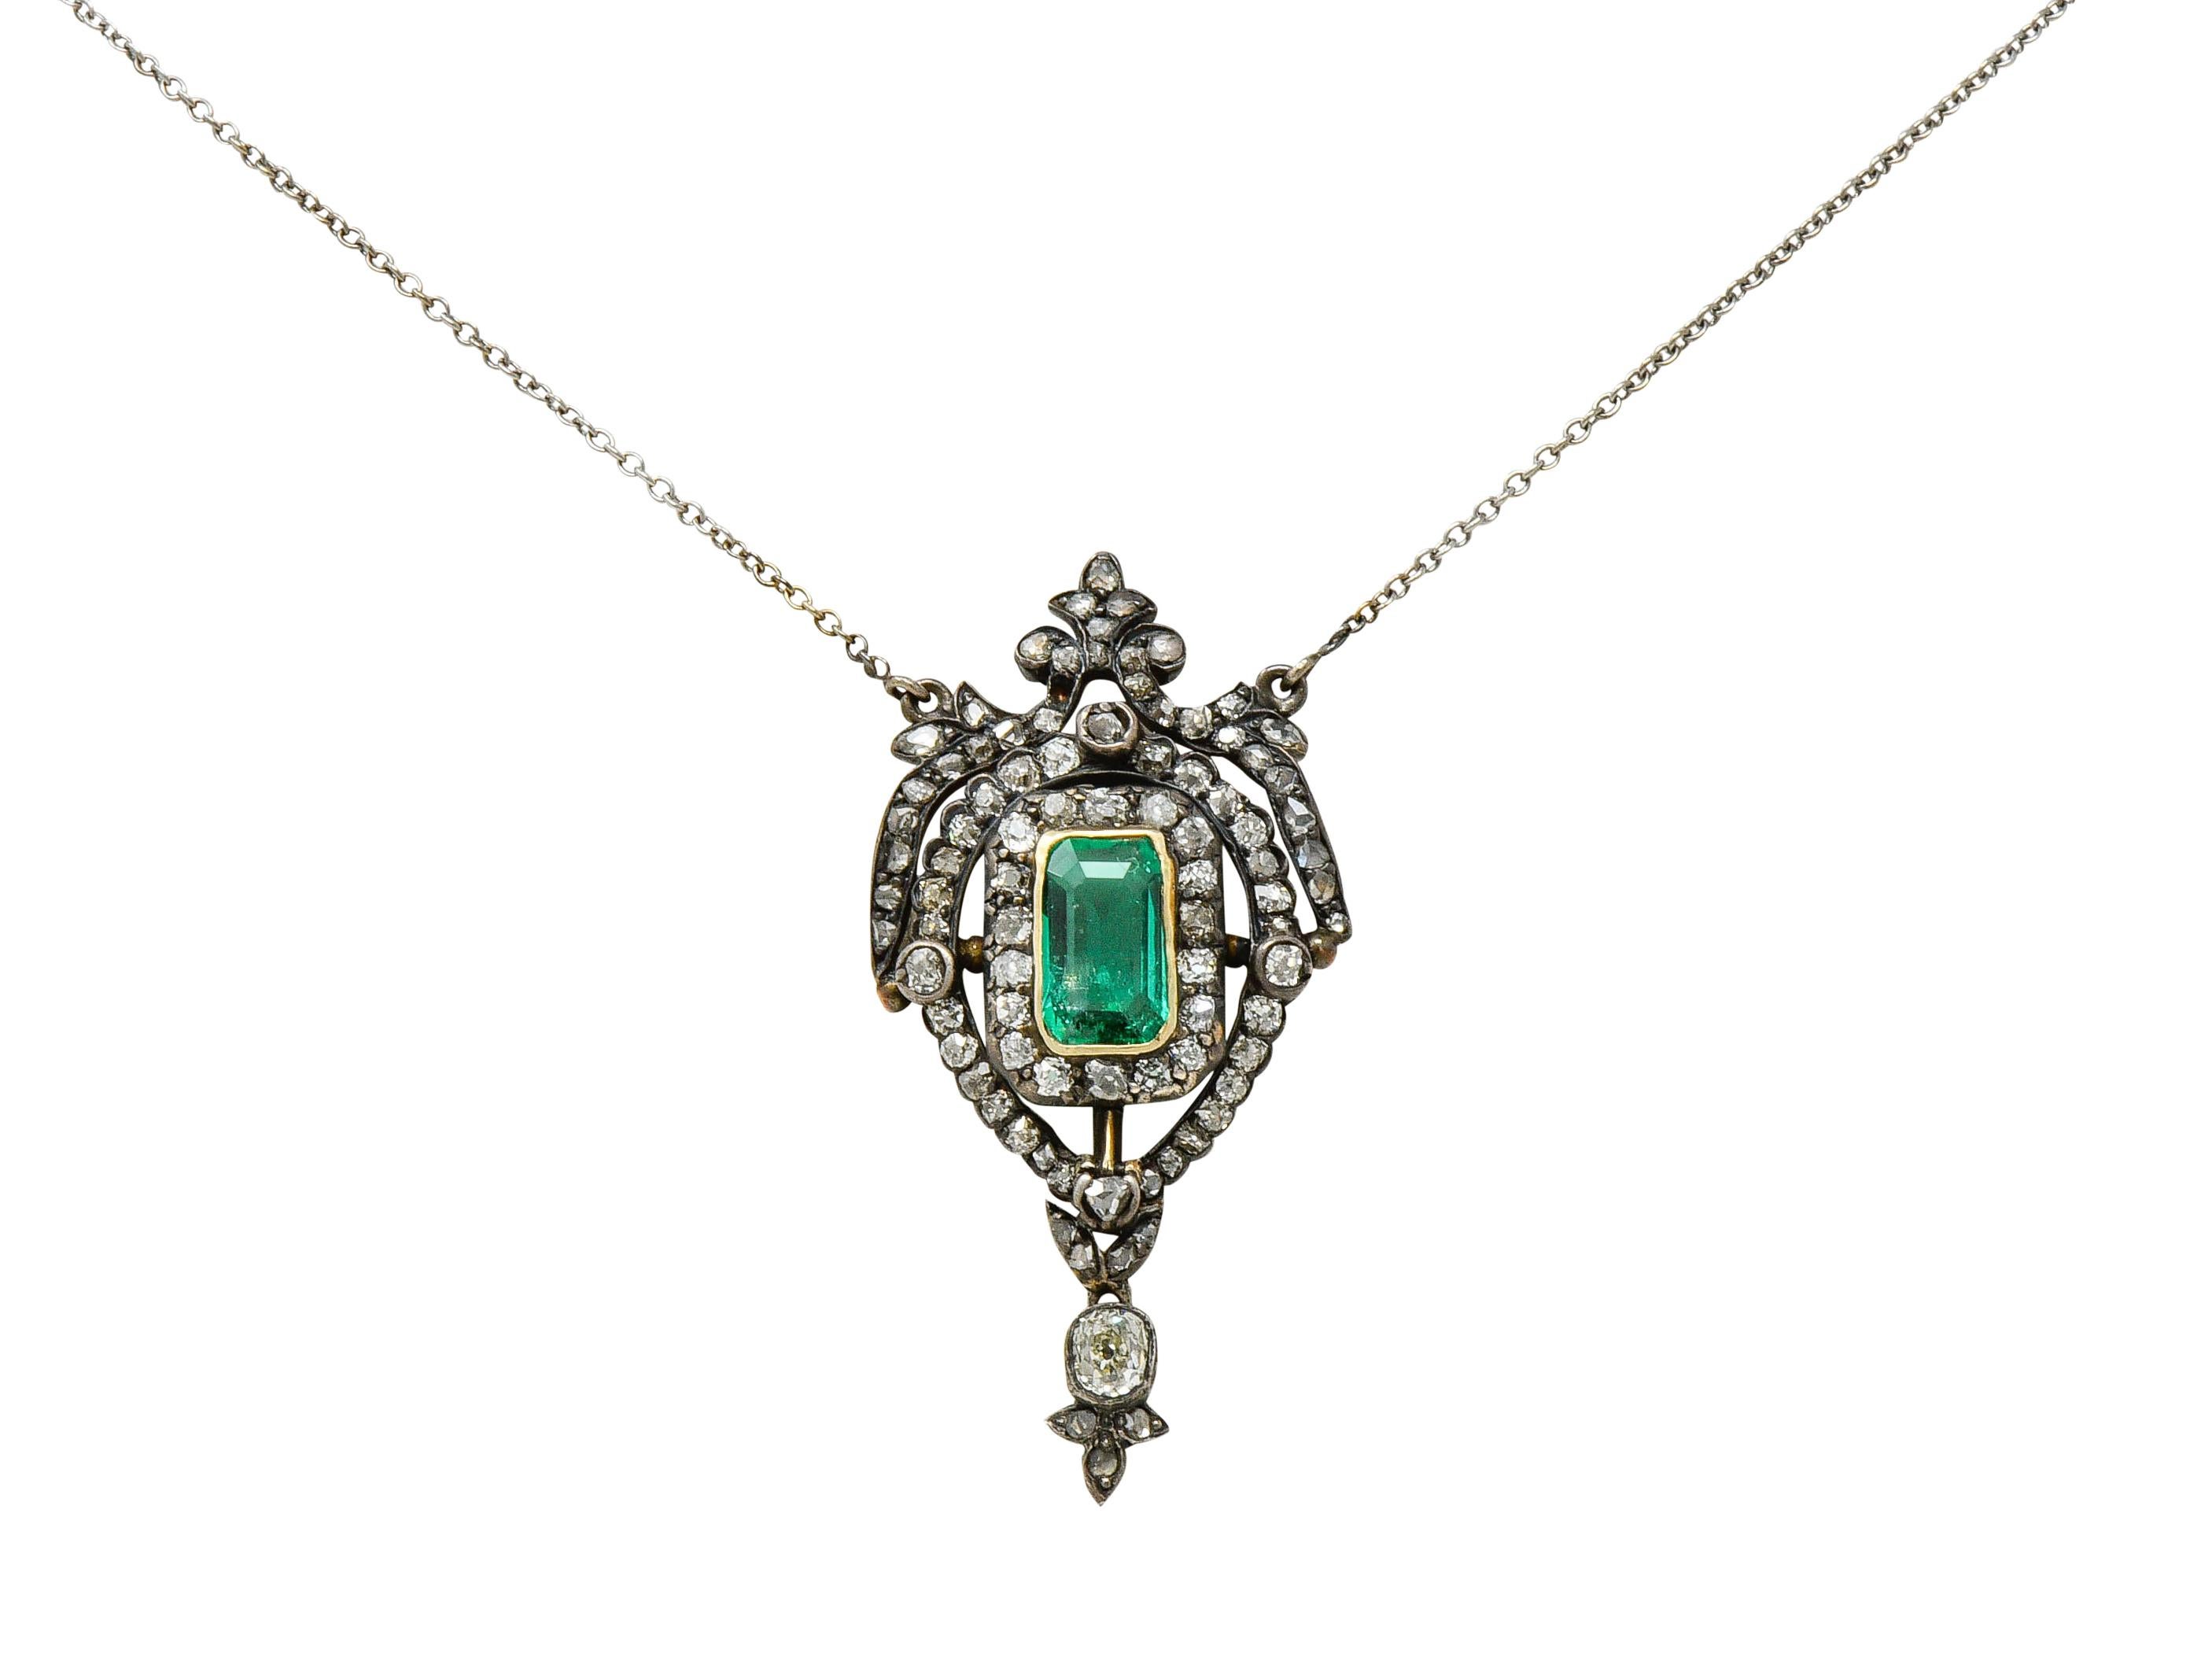 Rose Cut Early Victorian Emerald Diamond Silver-Topped Gold Ornate Drop Necklace